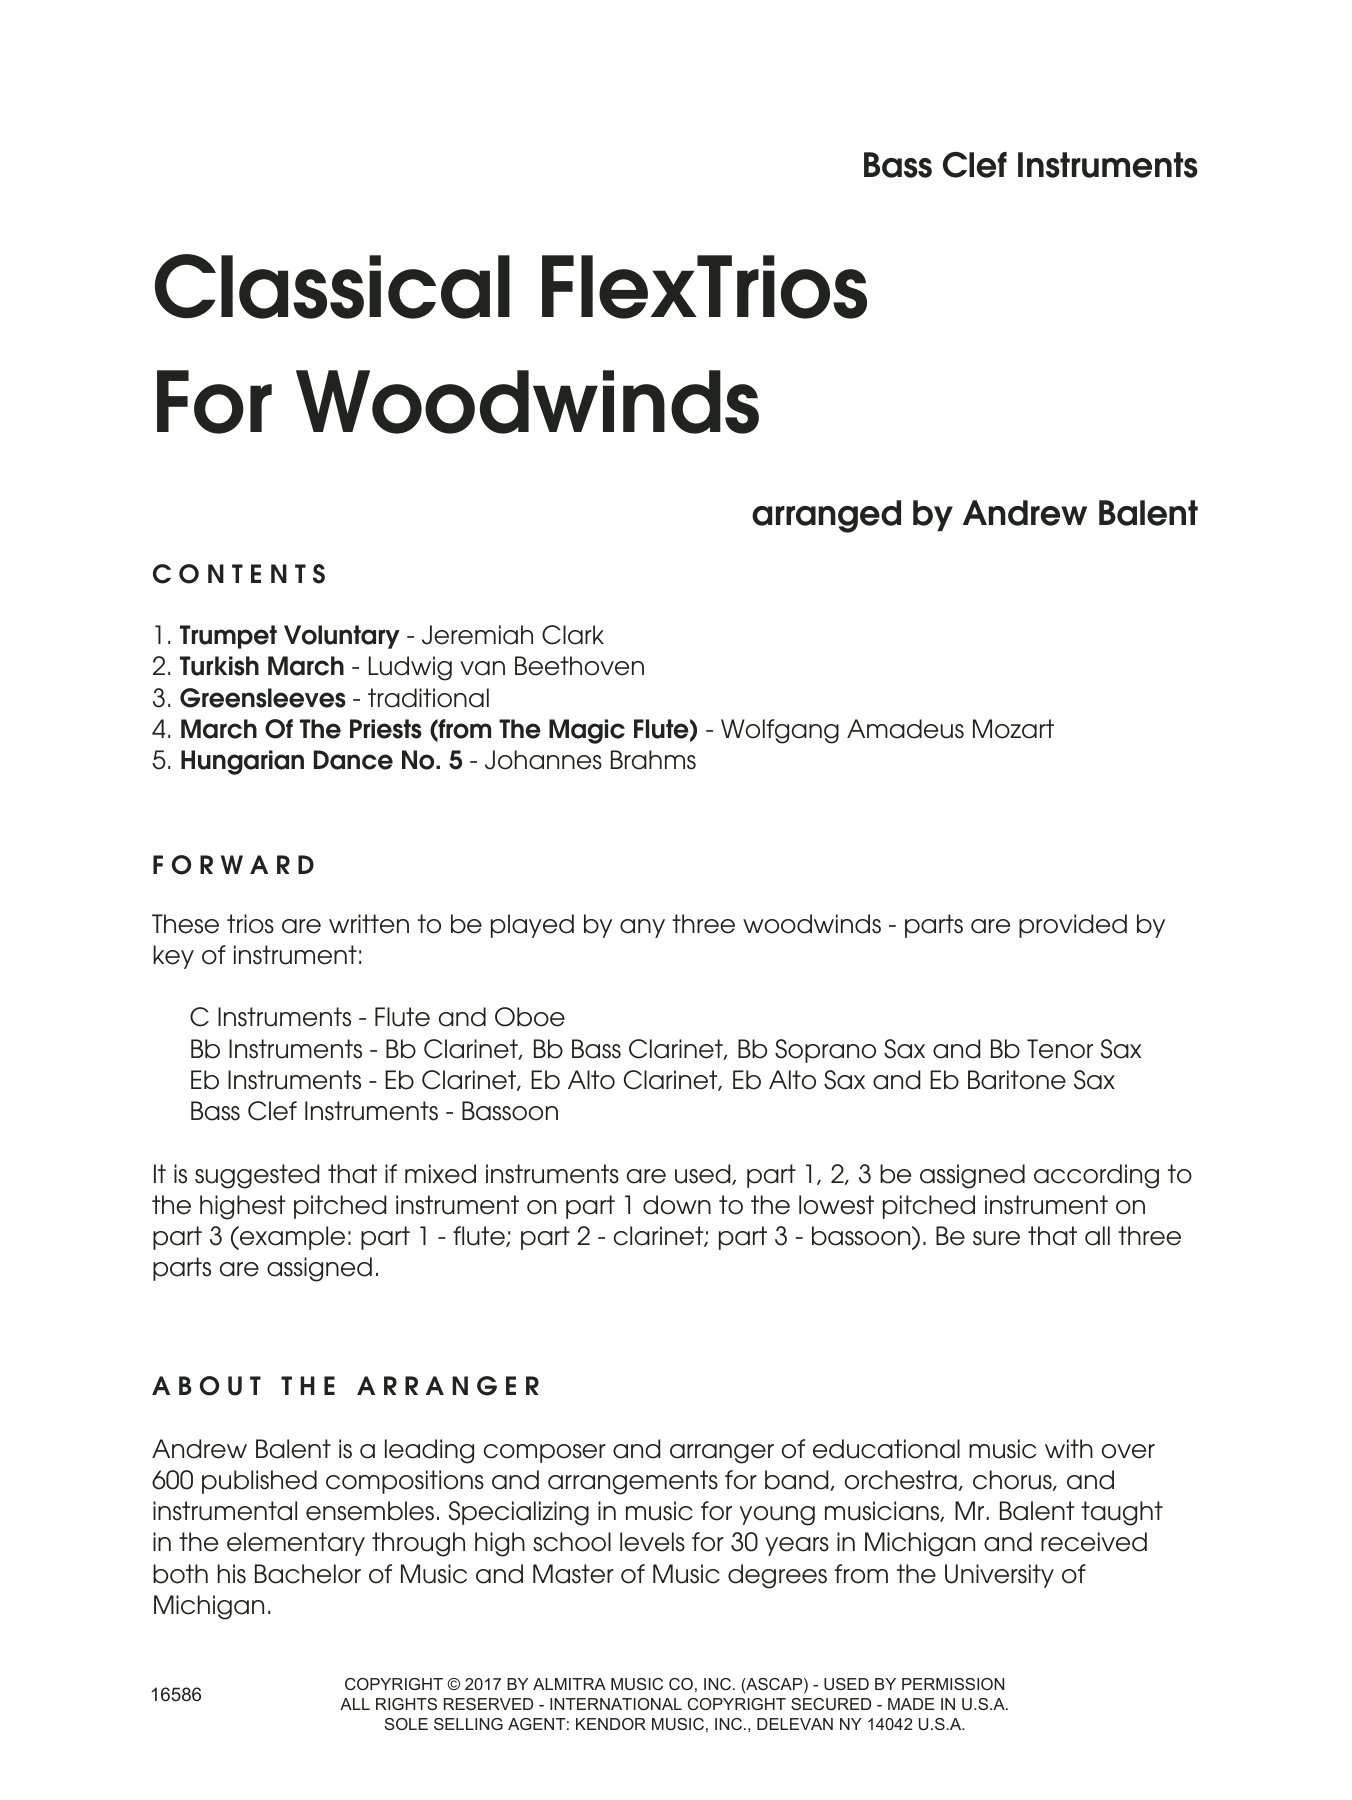 Download Andrew Balent Classical FlexTrios For Woodwinds - C B Sheet Music